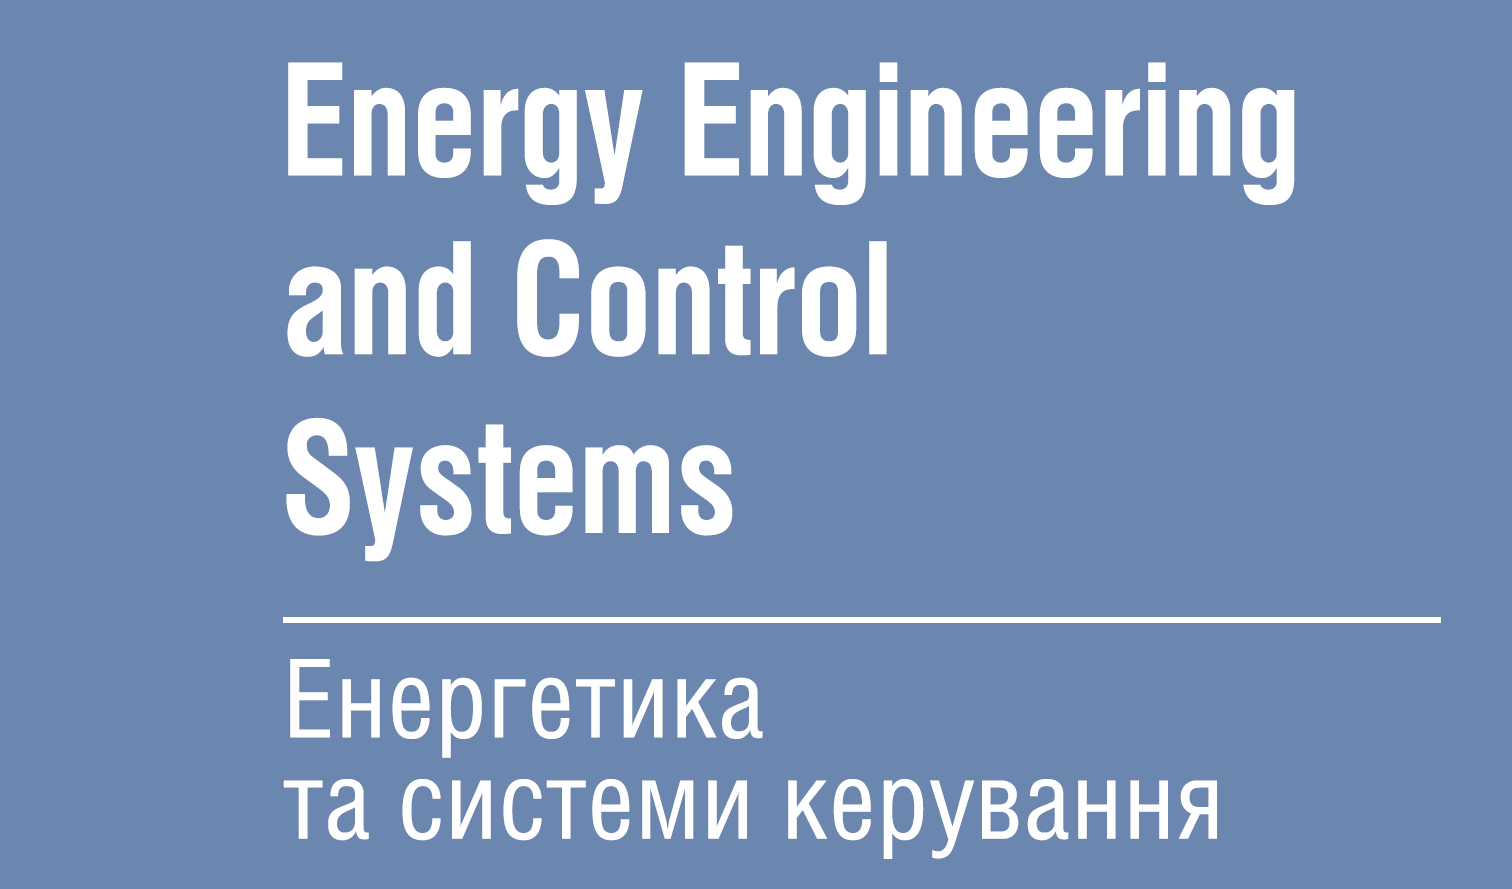 «Energy Engineering and Control Systems»